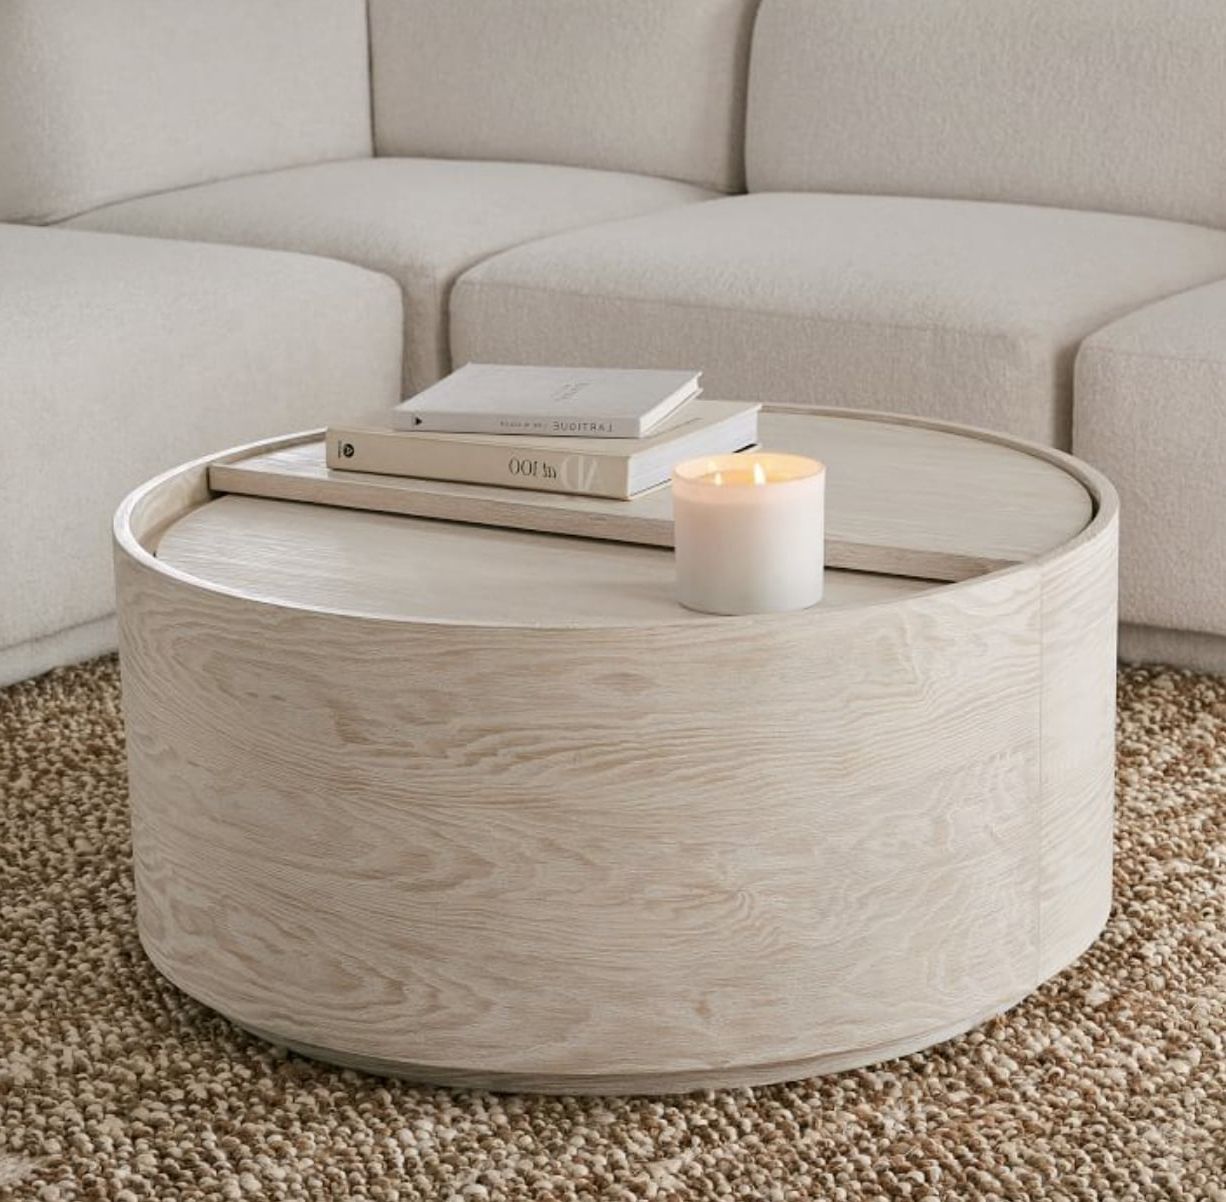 Popsugar Home Within Most Up To Date White Storage Coffee Tables (Gallery 20 of 20)